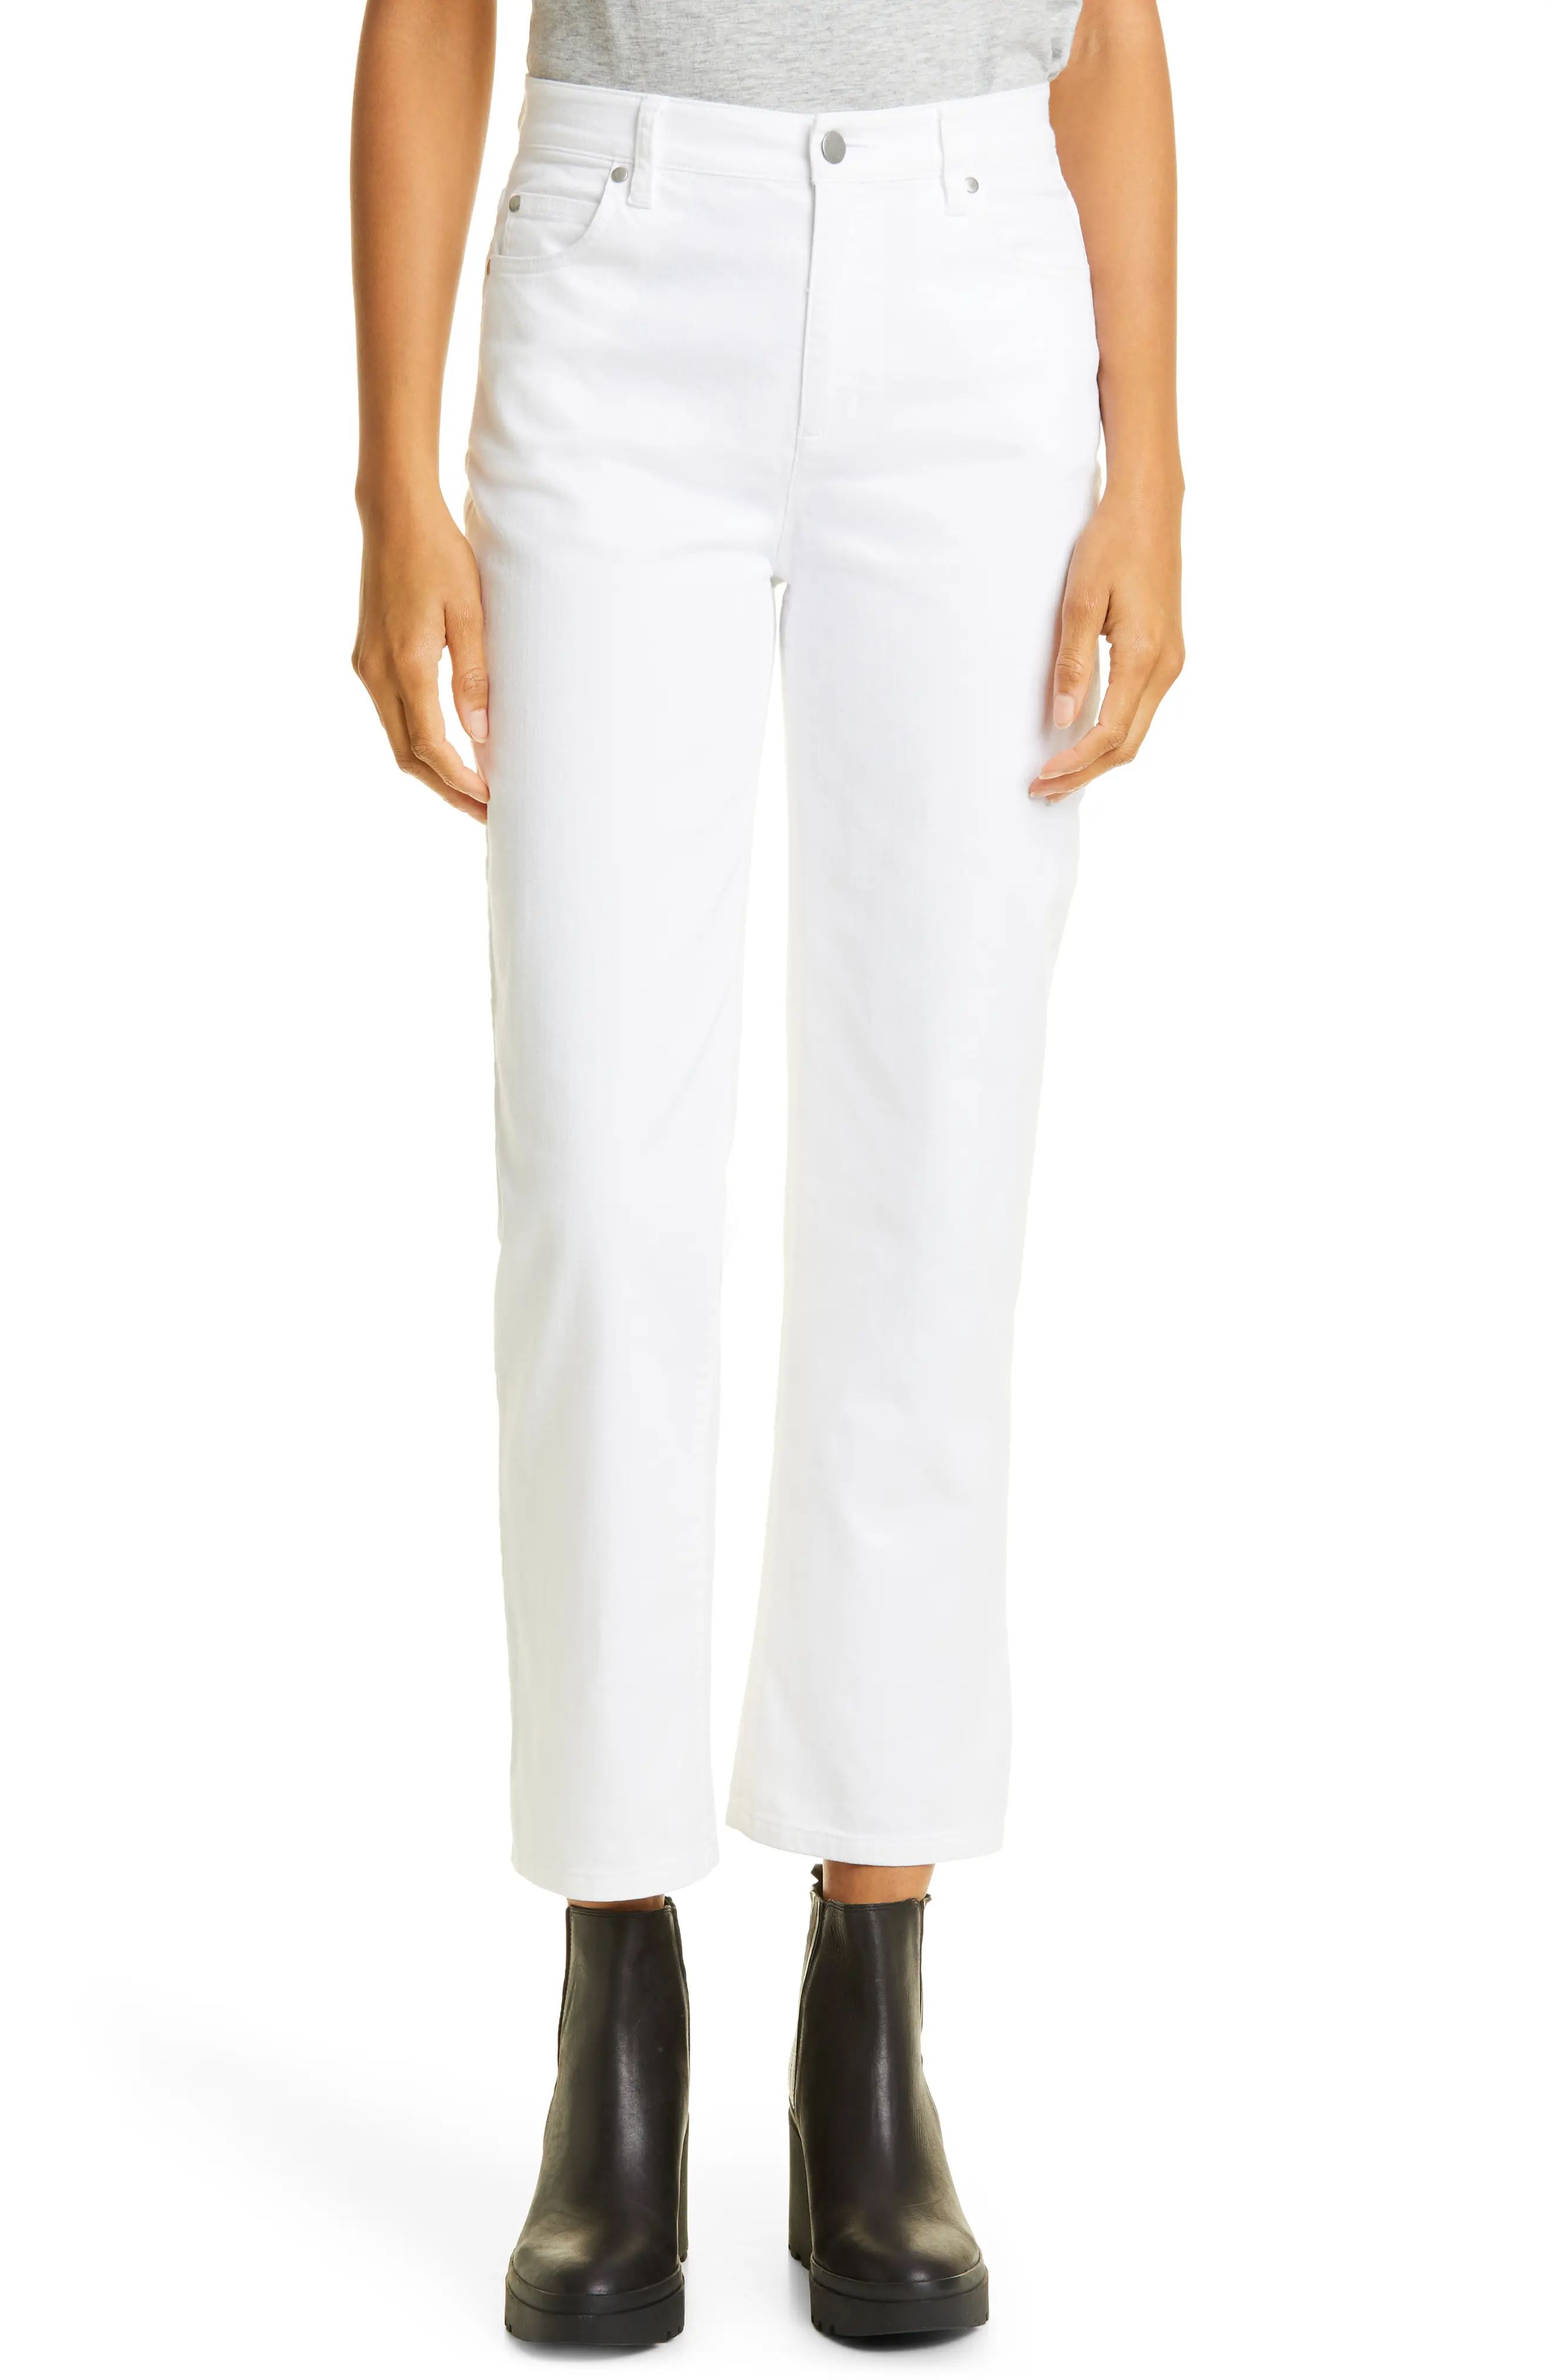 Eileen Fisher High Waist Stretch Organic Cotton Pants in White at Nordstrom, Size 4 | Nordstrom